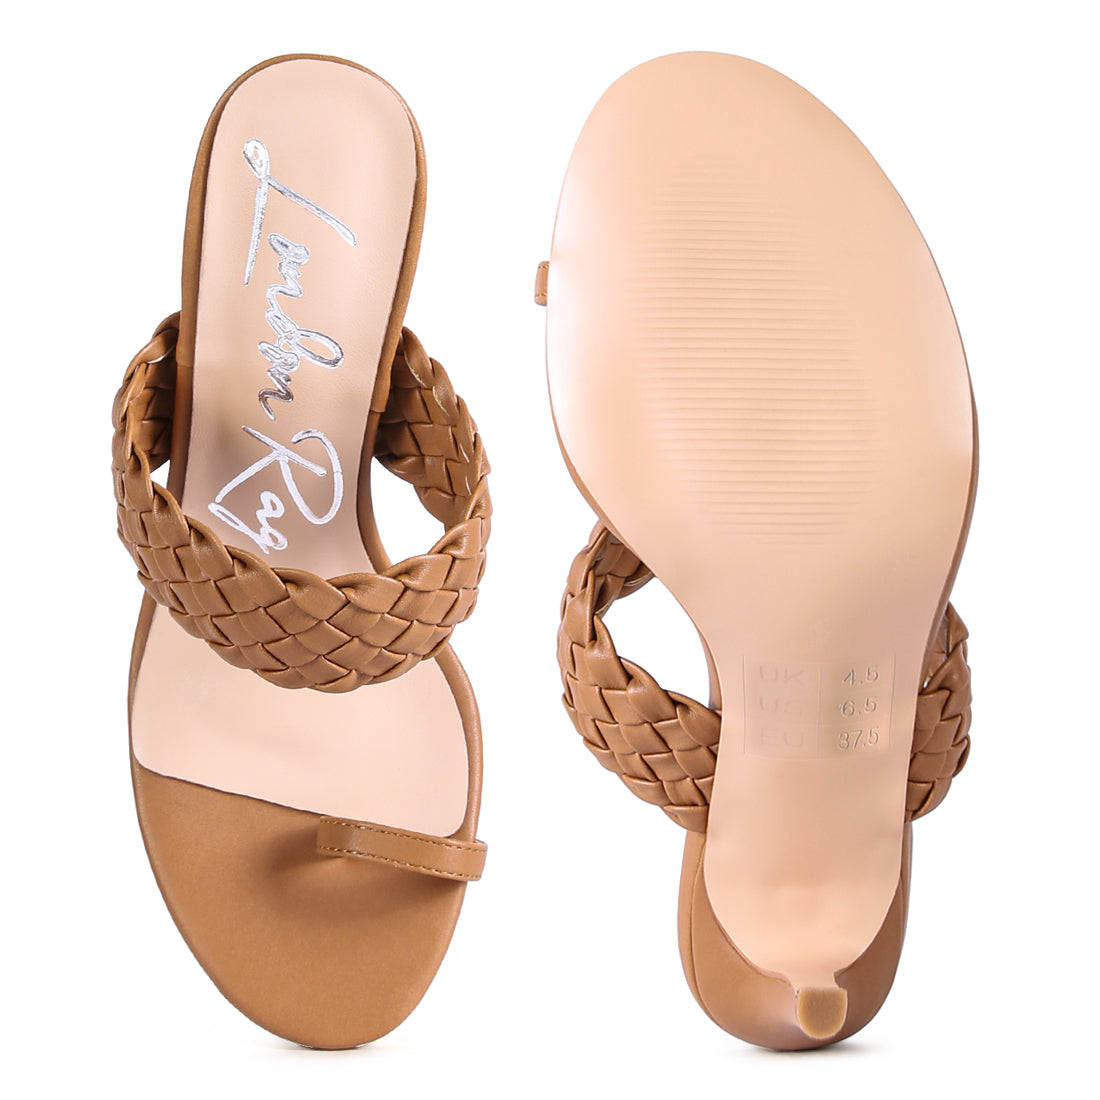 Woven Strap Toe Ring Sandals in Tan